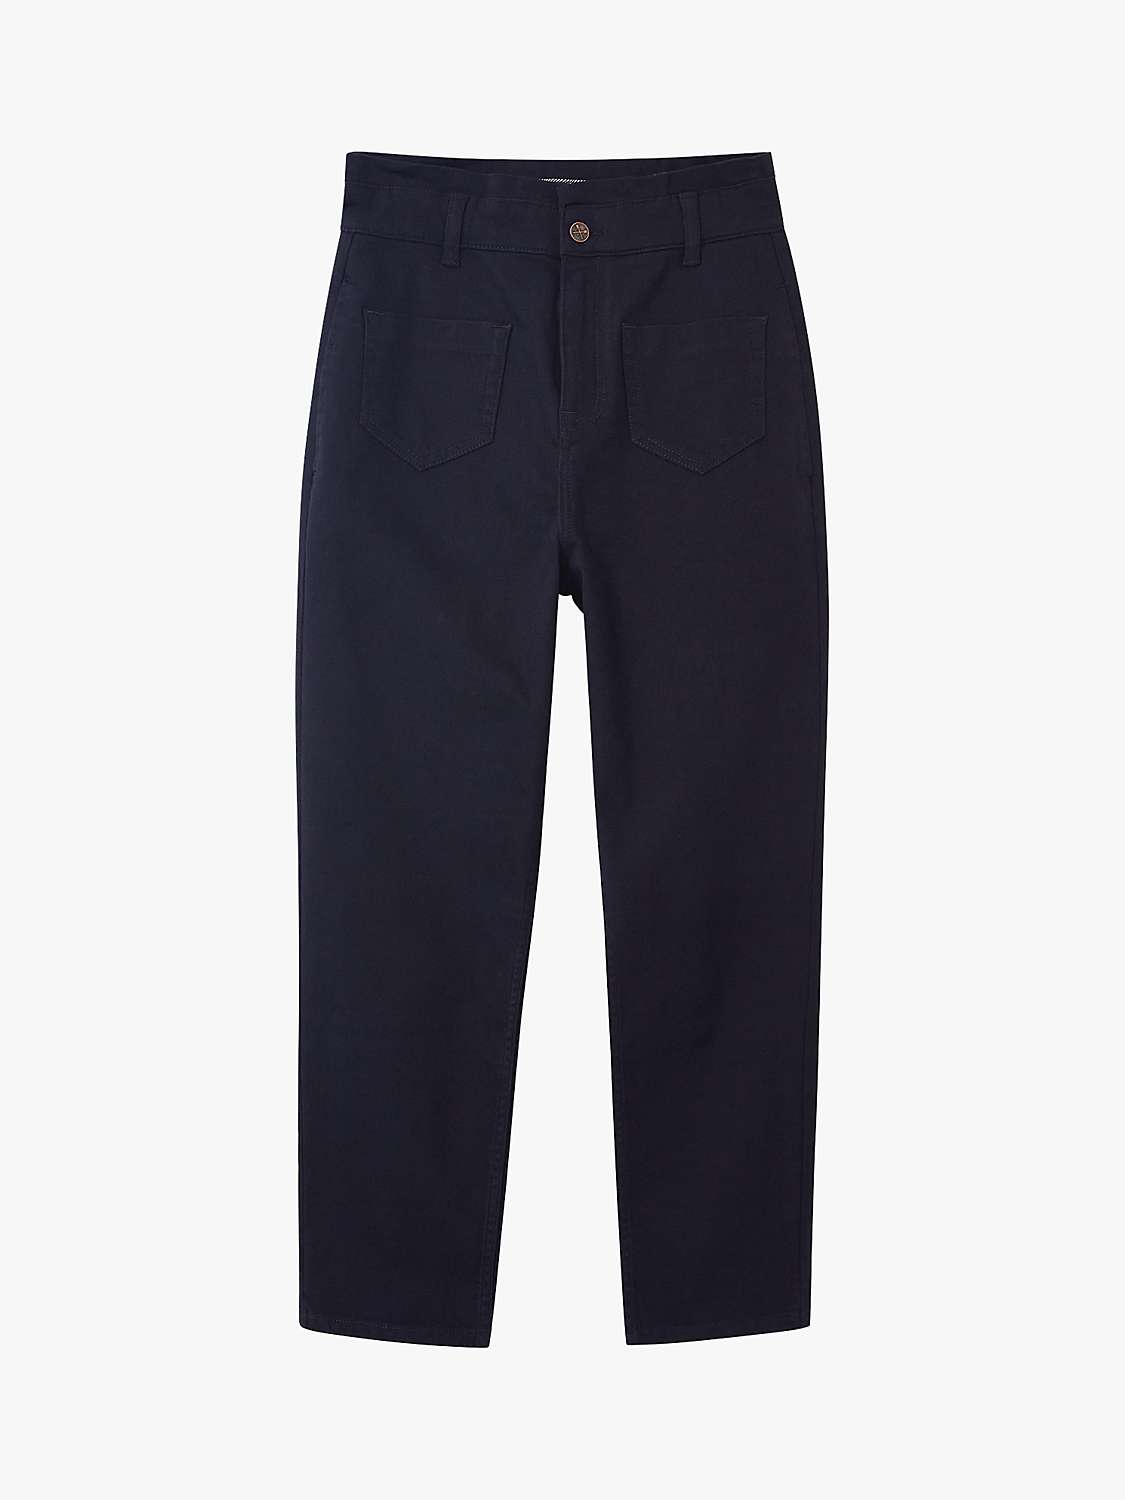 Crew Clothing Cambridge Cropped Trousers, Green at John Lewis & Partners